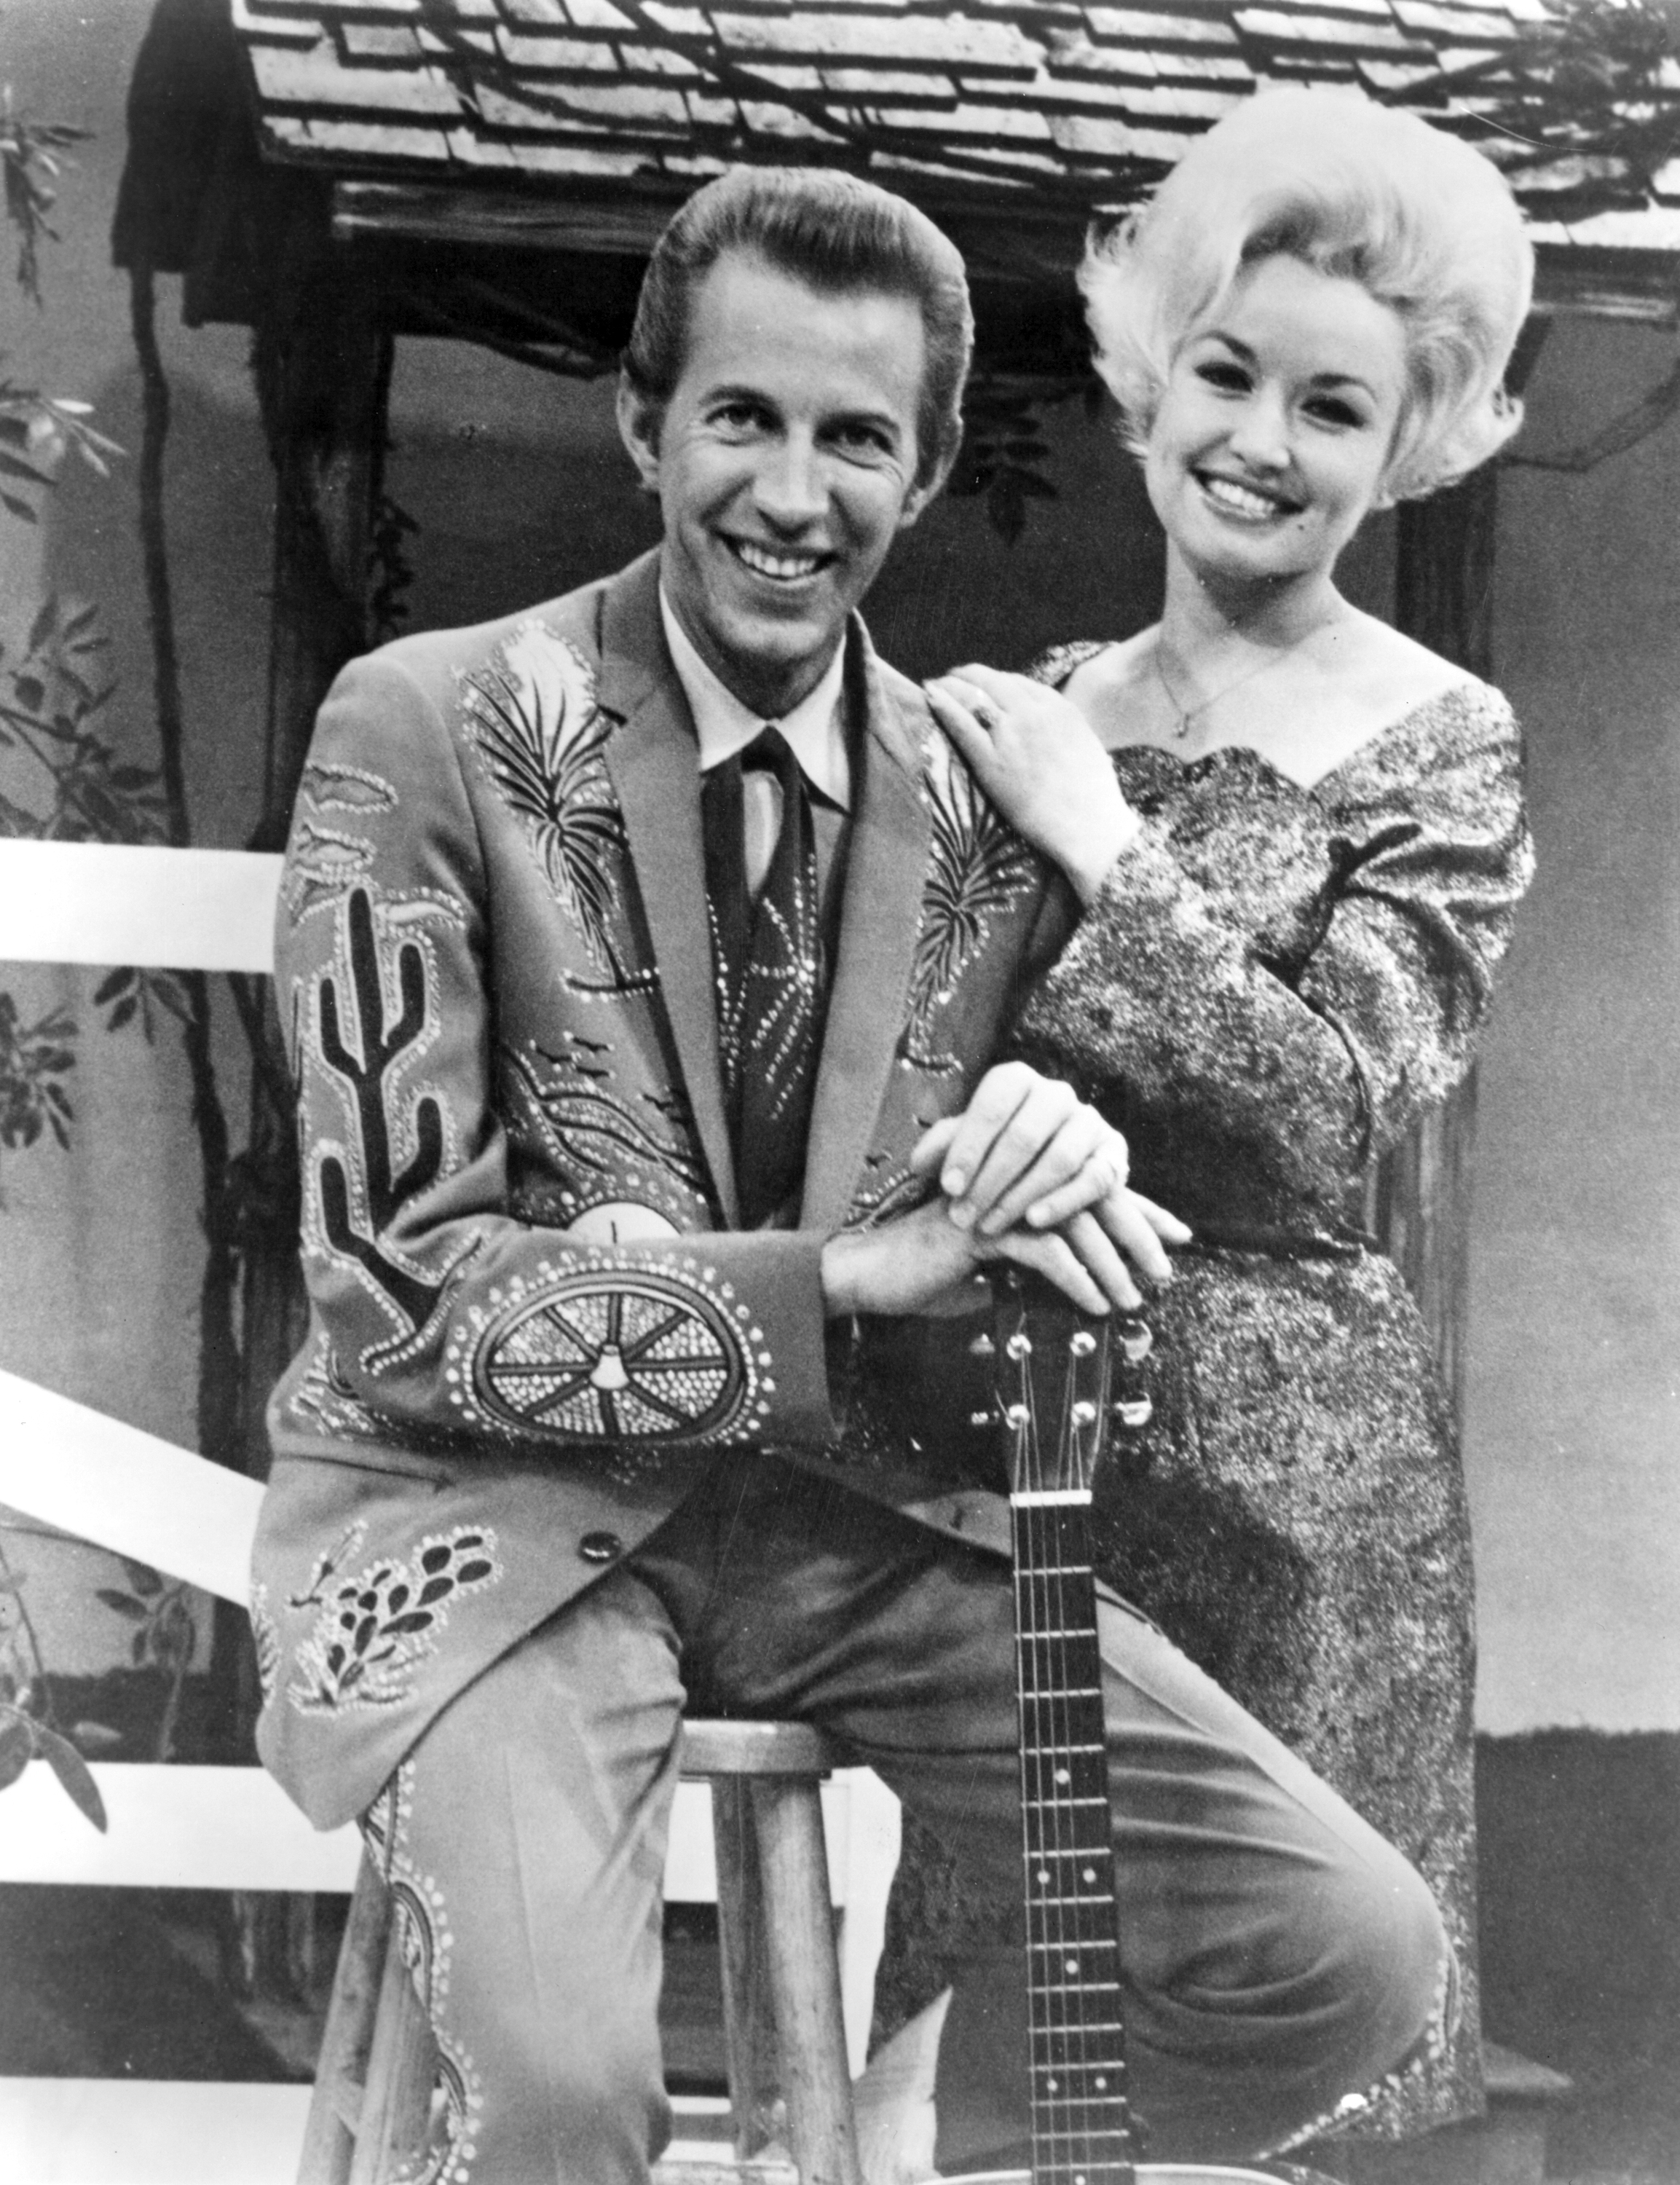 Smiling with a bouffant hairdo next to a man in a spangled outfit